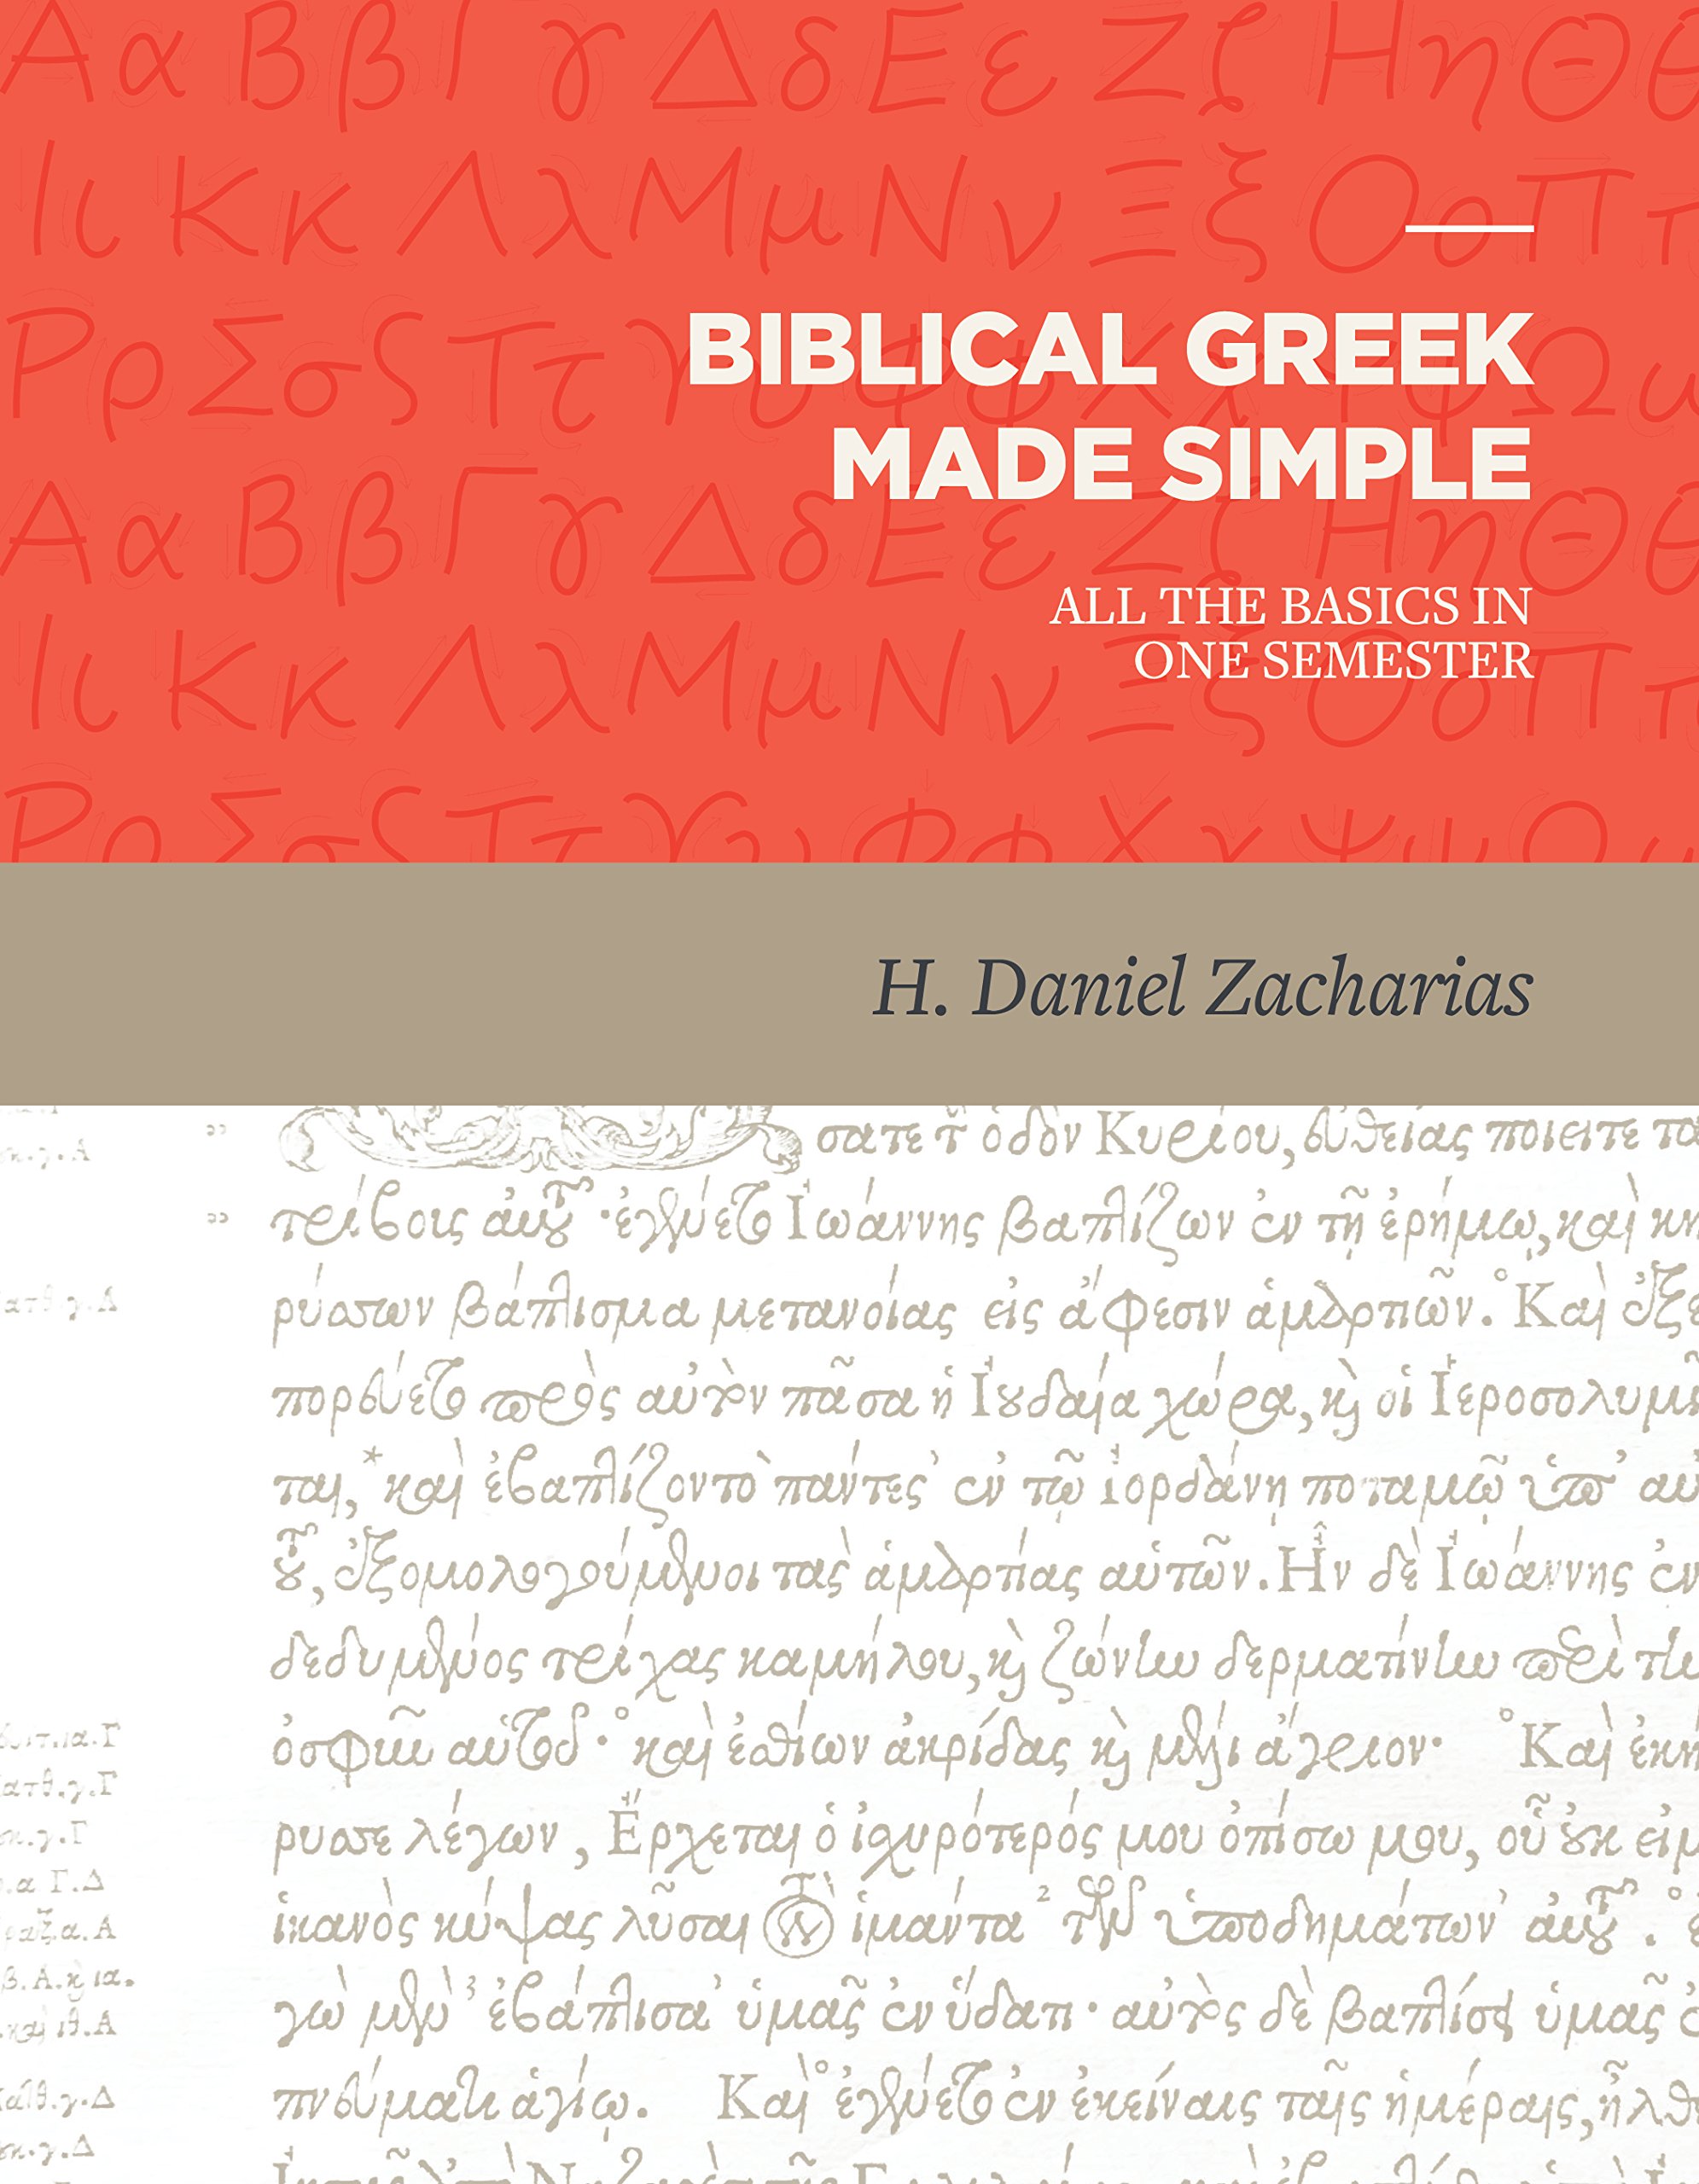 Book Notice: BIBLICAL GREEK MADE SIMPLE: ALL THE BASICS IN ONE SEMESTER, by H. Daniel Zacharias